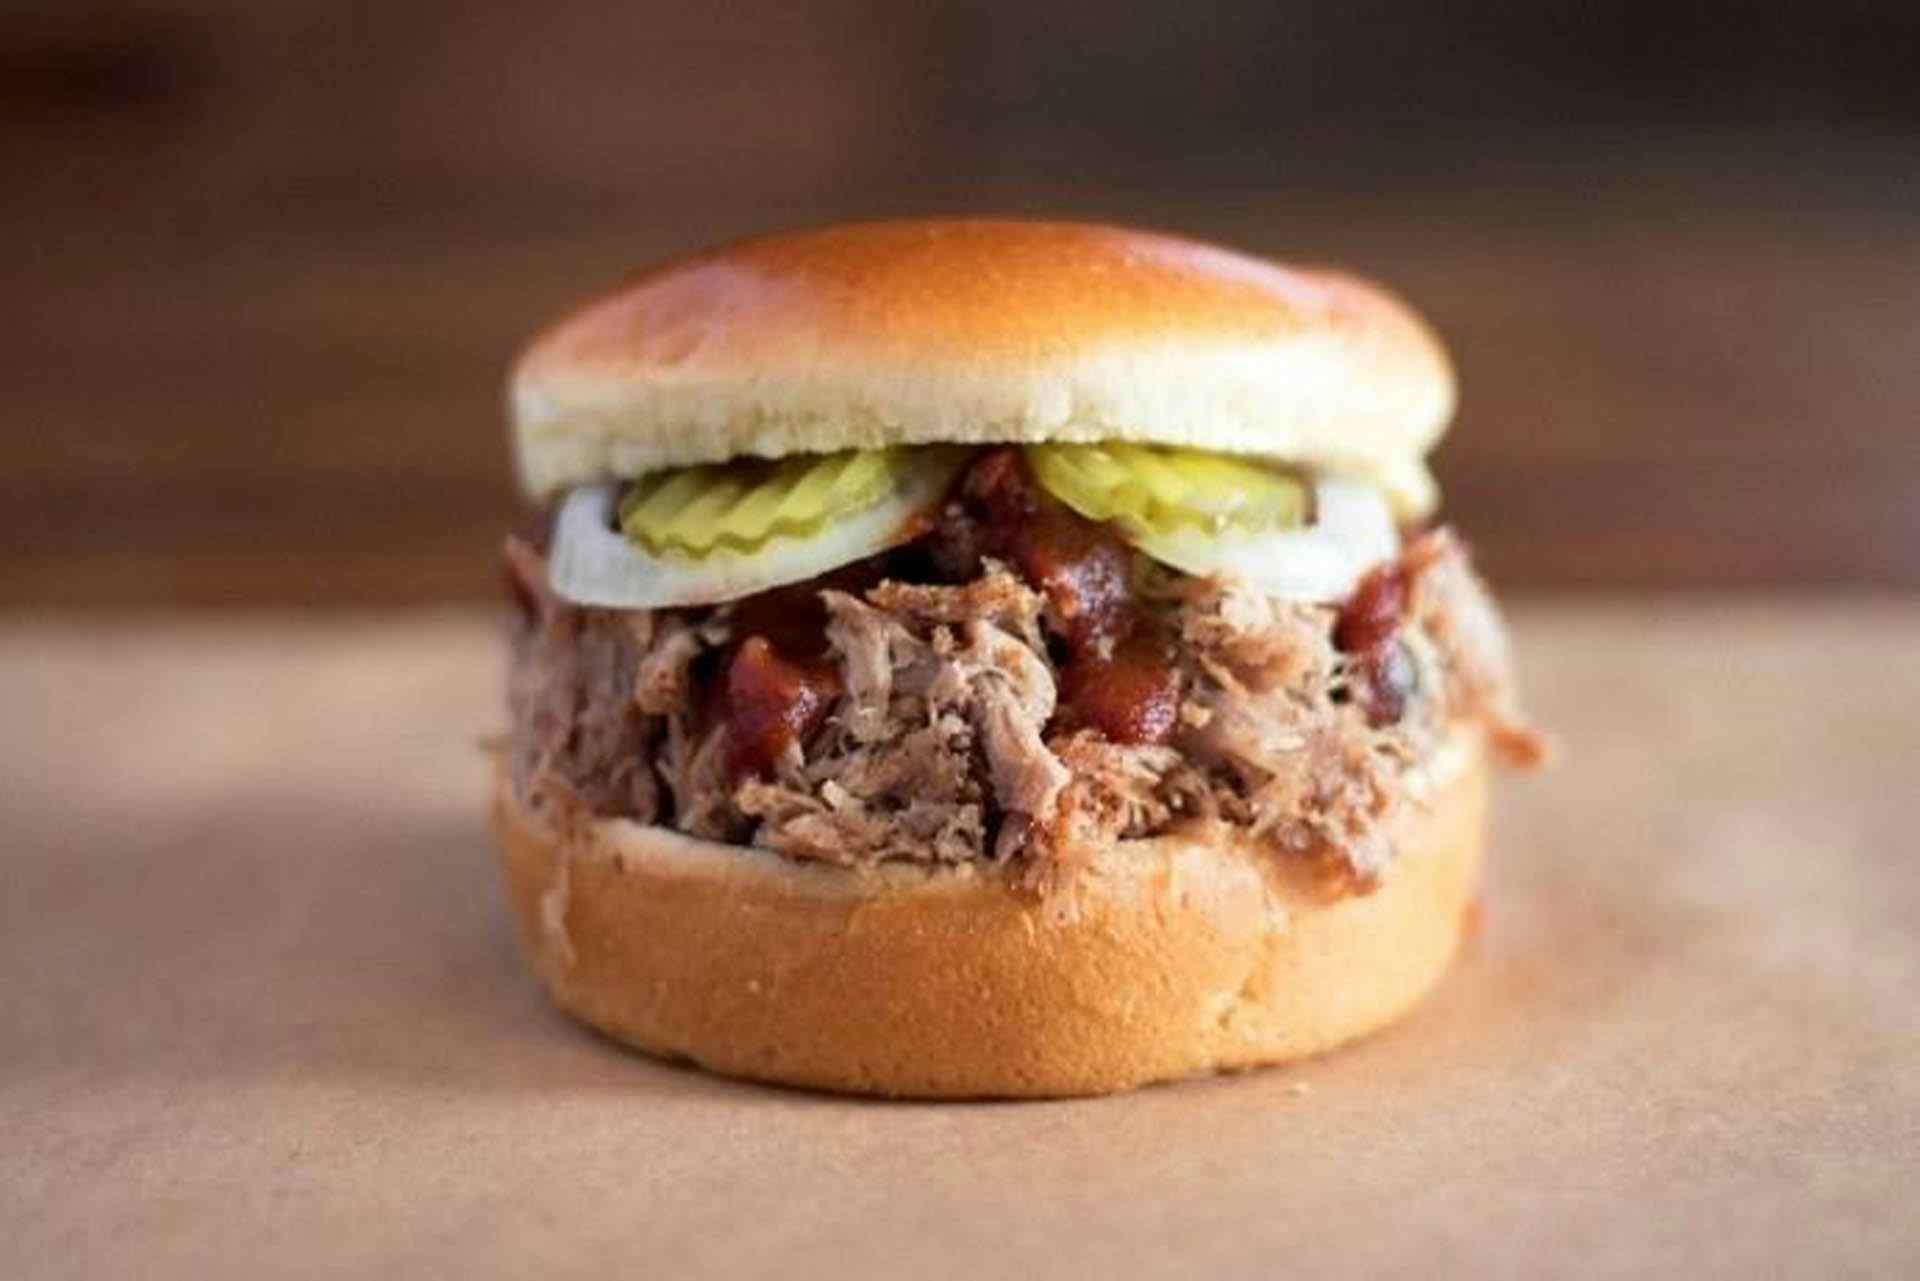 Ink: The A-Z list of Kansas City-area barbecue restaurants, food trucks (July 2018)